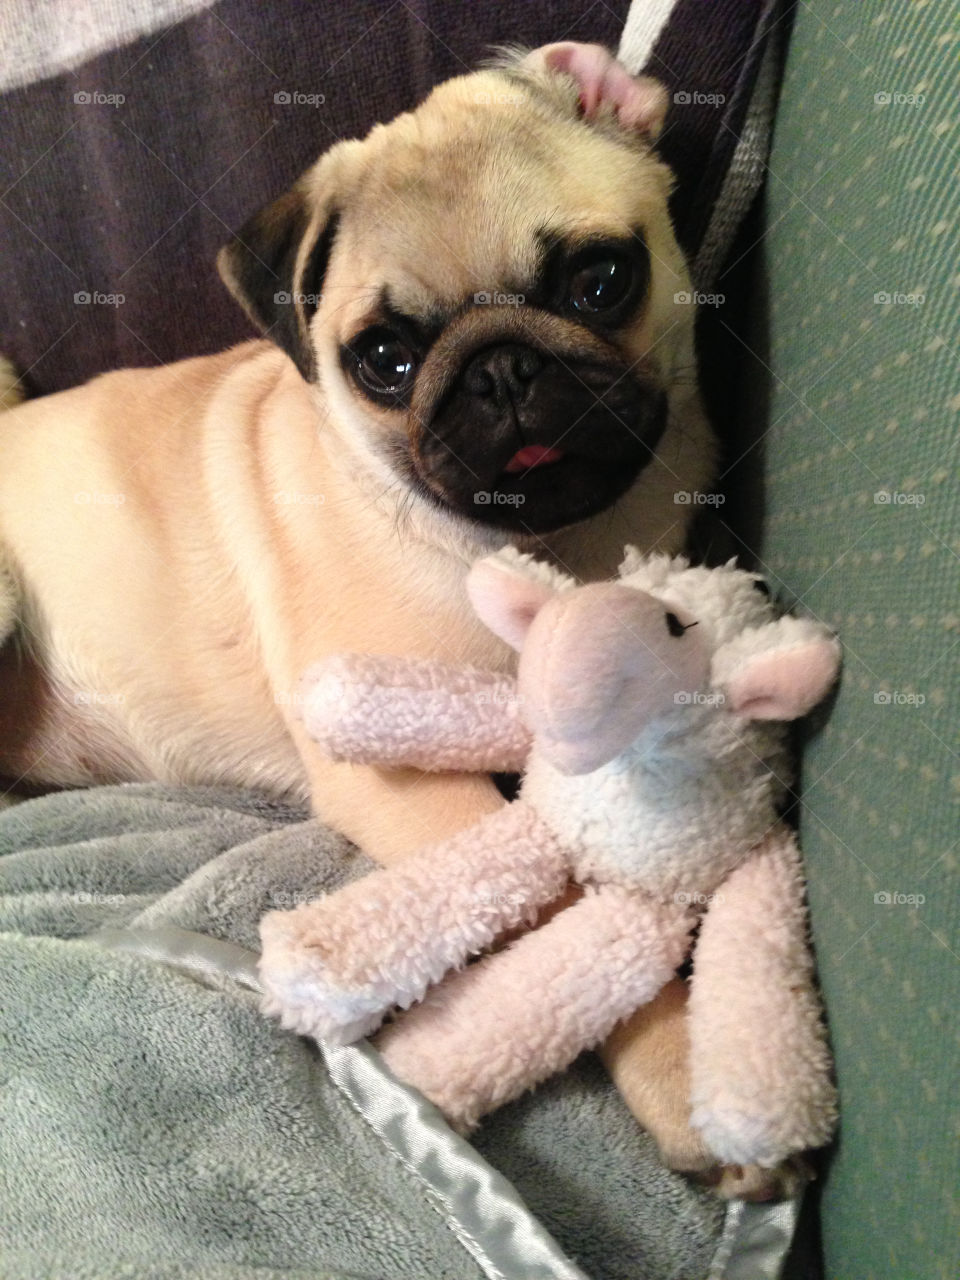 Pug dog with a toy lying on bed